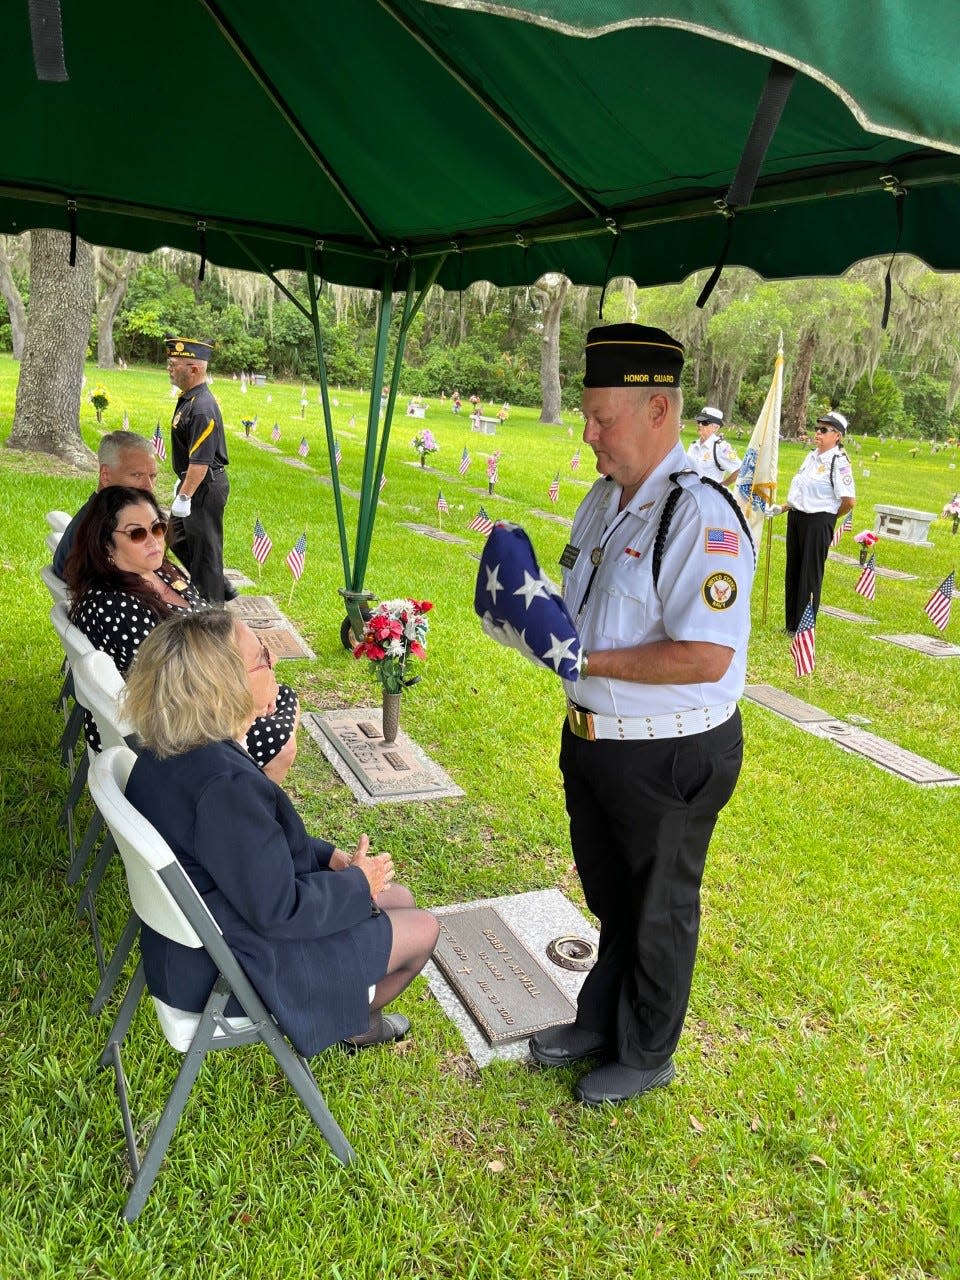 On June 1, 2022 there were special ceremonies held for two Marion County veterans, Robert Joseph Hamill Sr., 80, and Charles Sumner Wesley II, 72, whose bodies went unclaimed. The ceremonies were held at Forest Lawn Memory Gardens in Ocala.